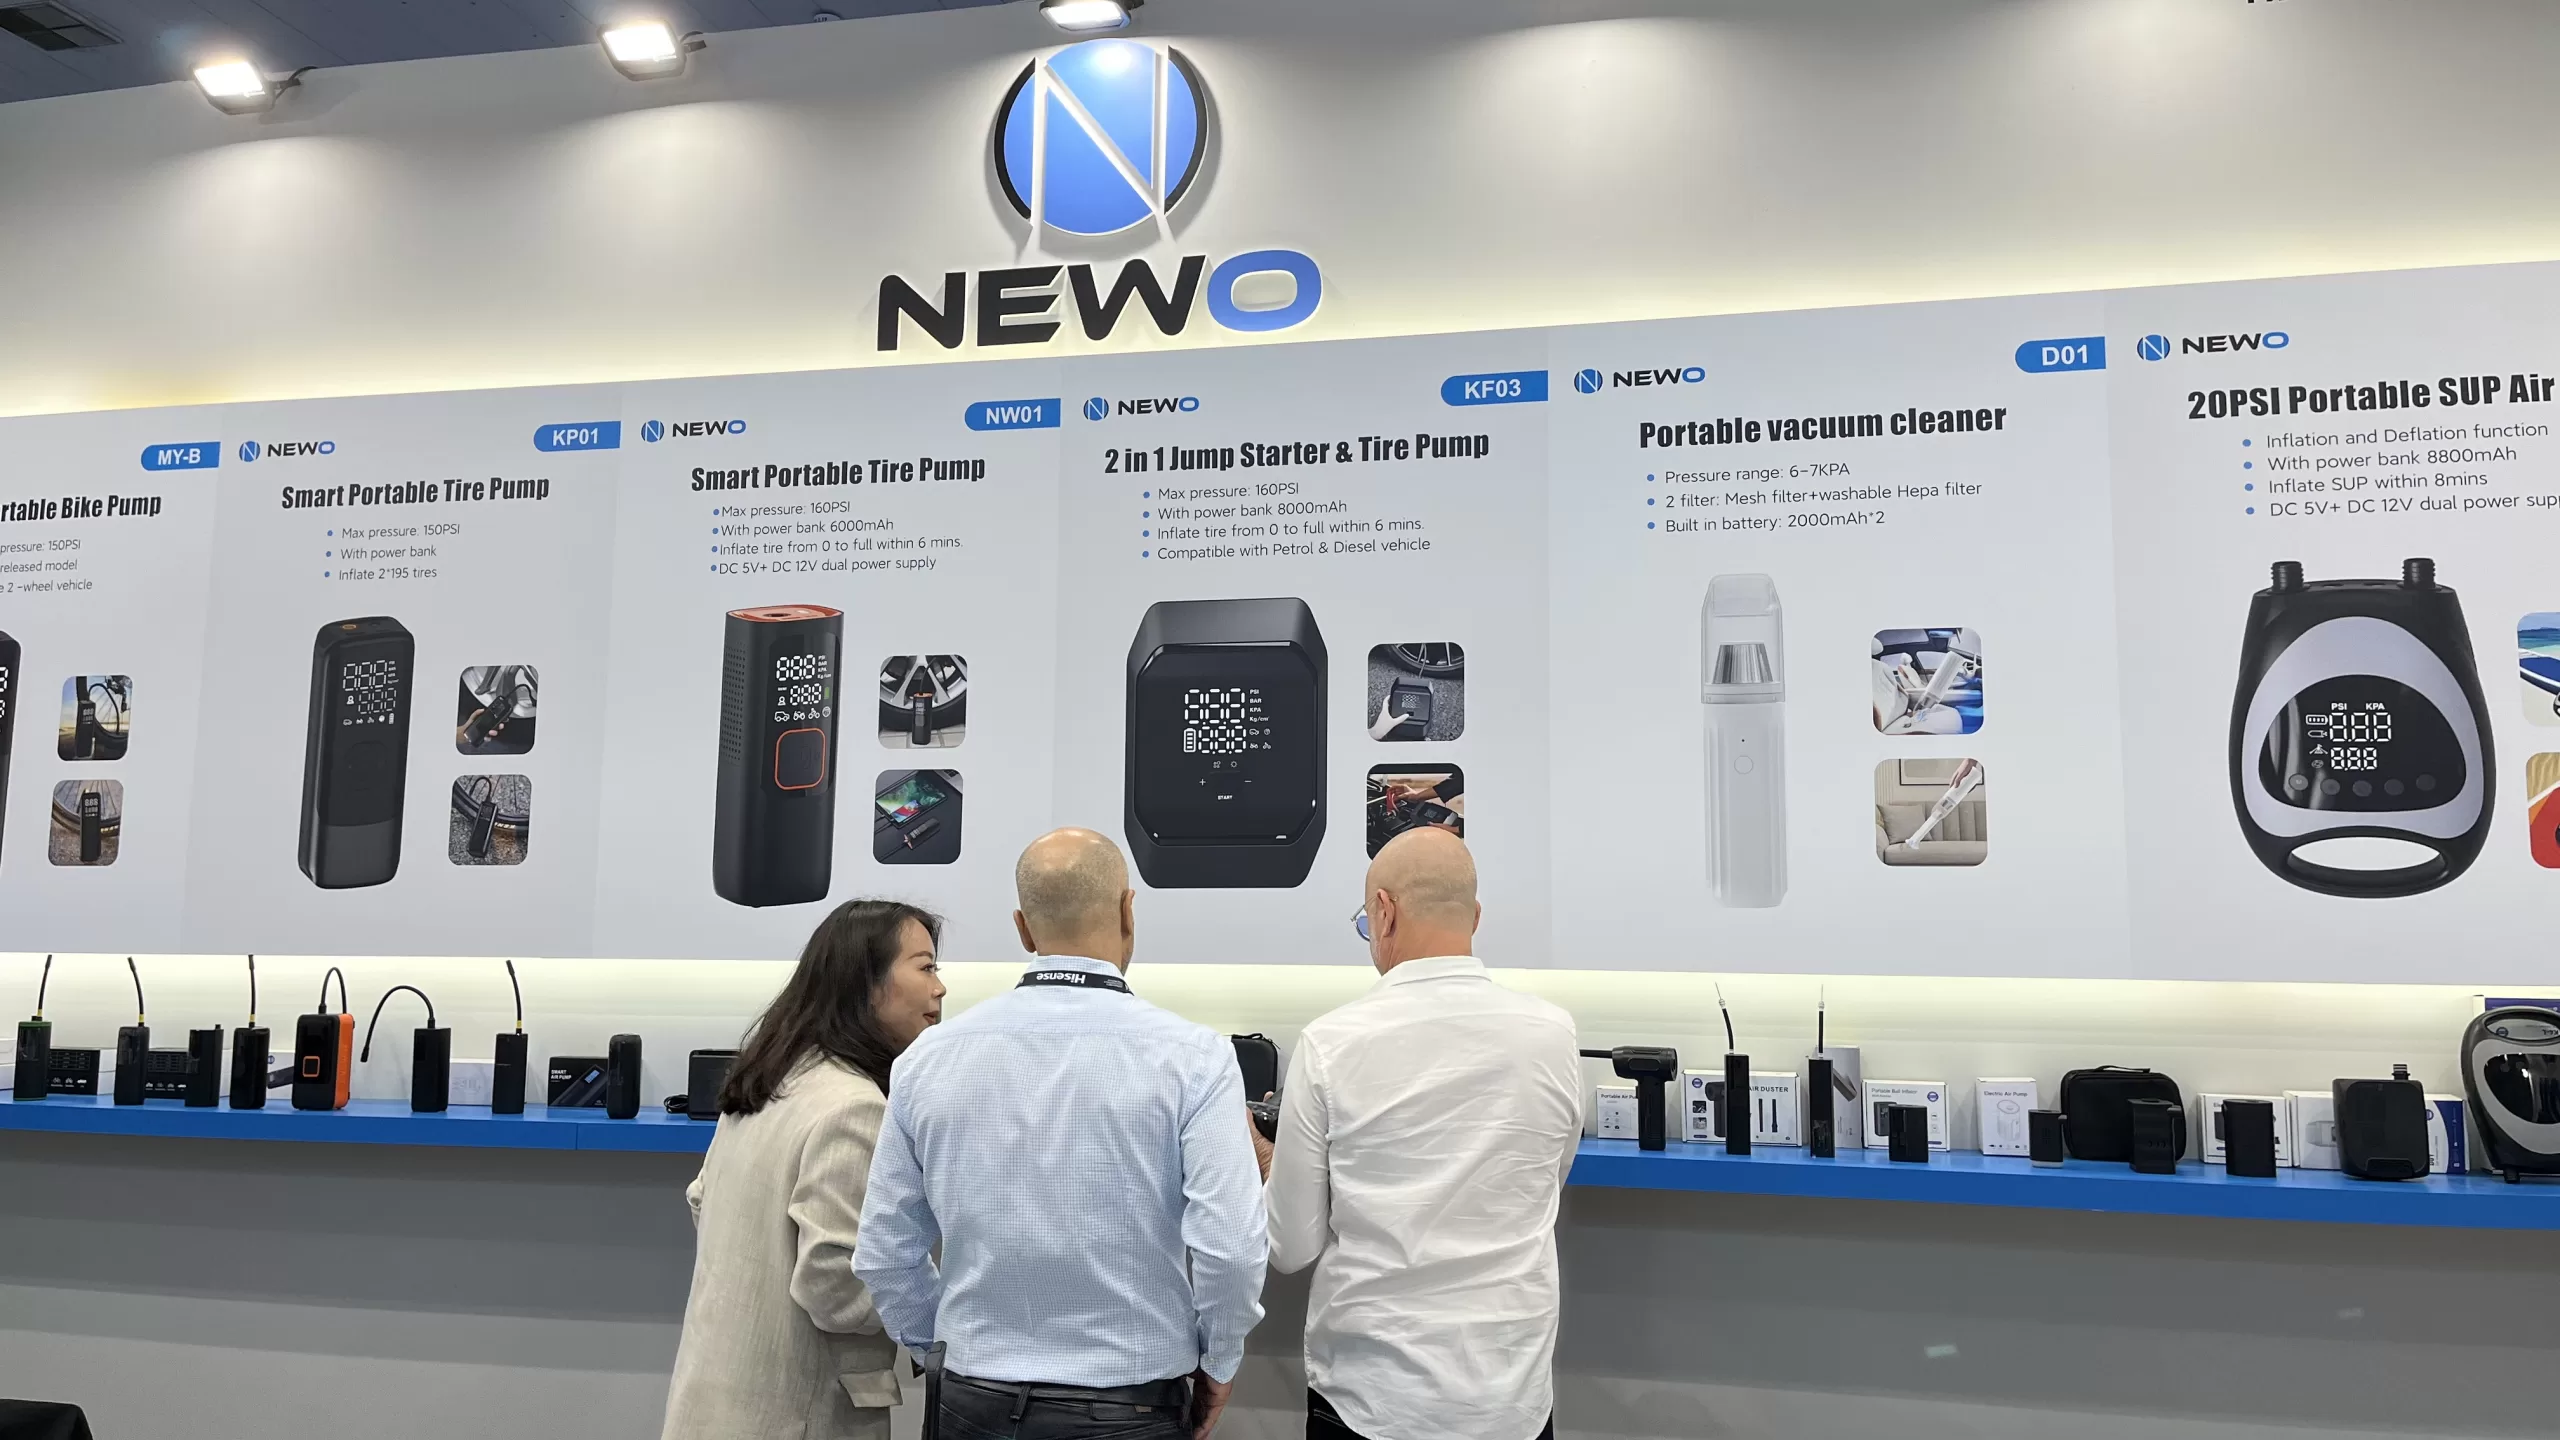 Smartnewo’s Exciting Experience at IFA: Showcasing Innovative Products and Building Business Relationships